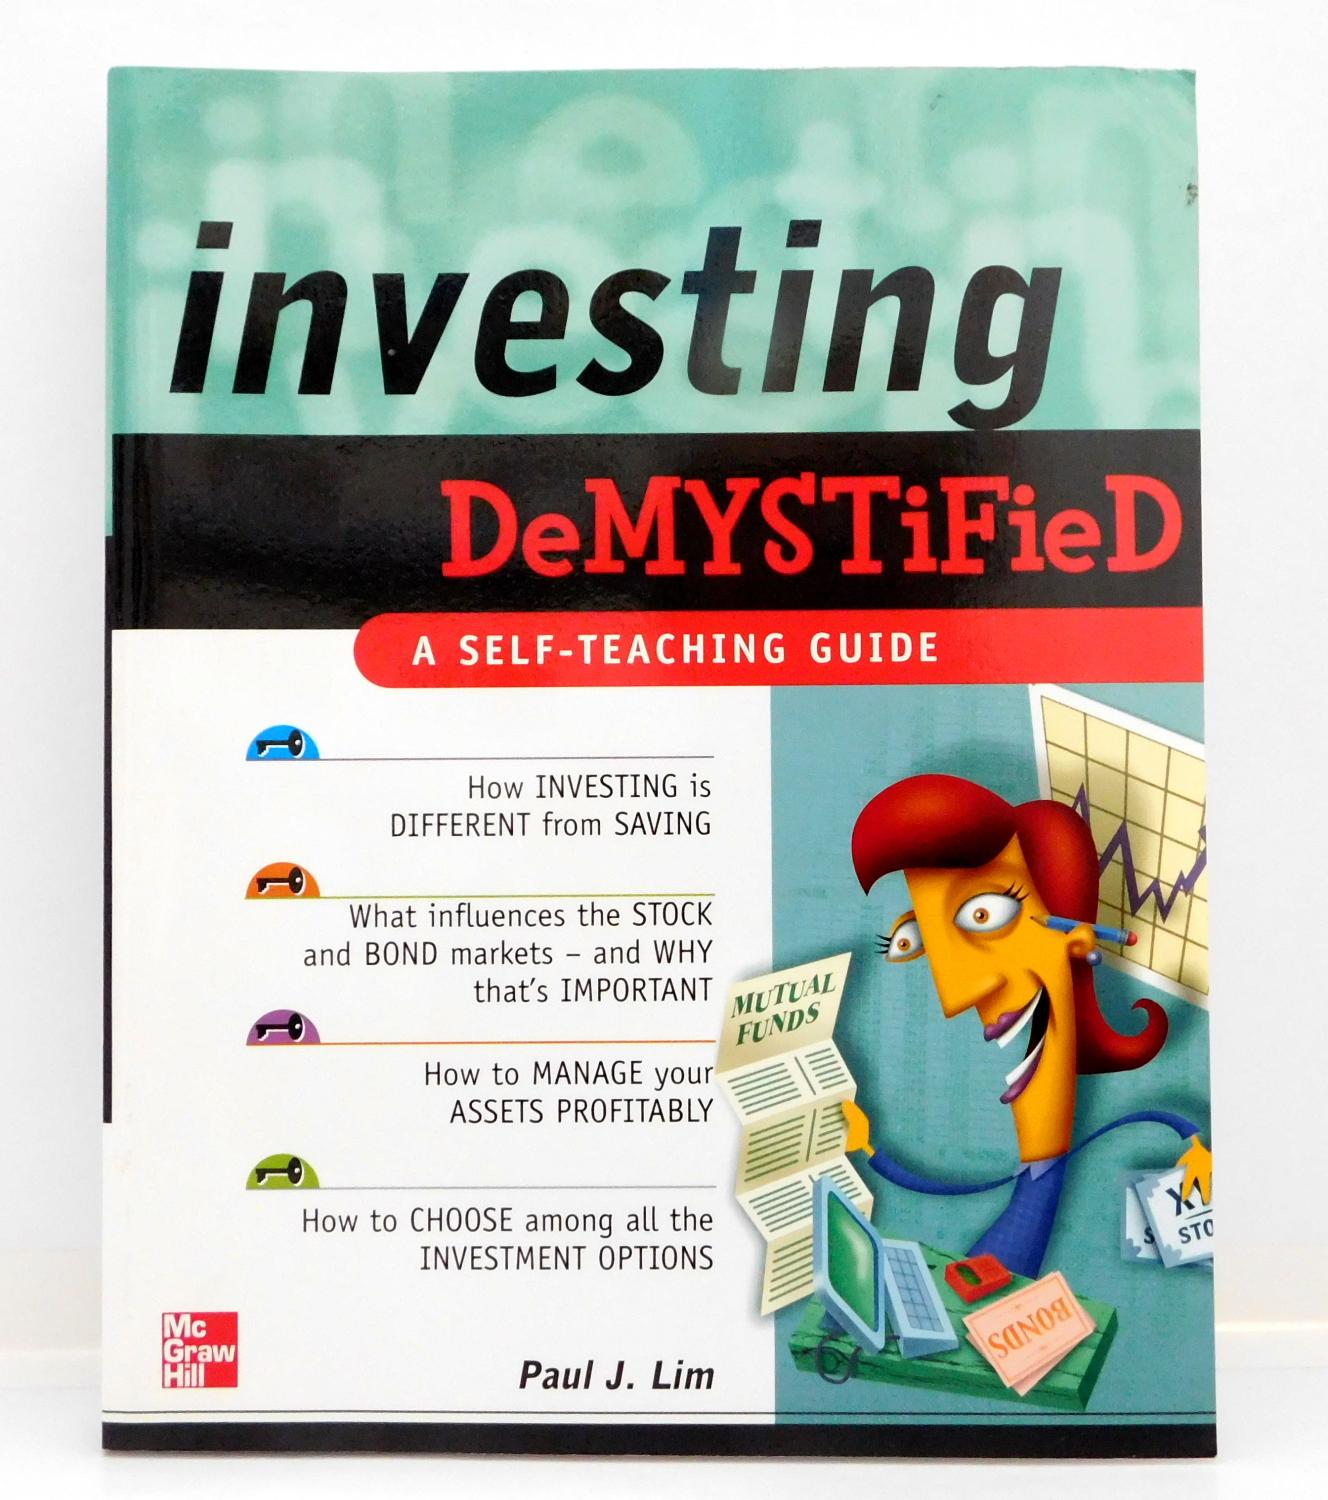 The　by　Parnassus　Investing　BookShop　Paul:　Demystified　(2005)　New　Lim,　First　As　Paperback　Edition　Paperback.